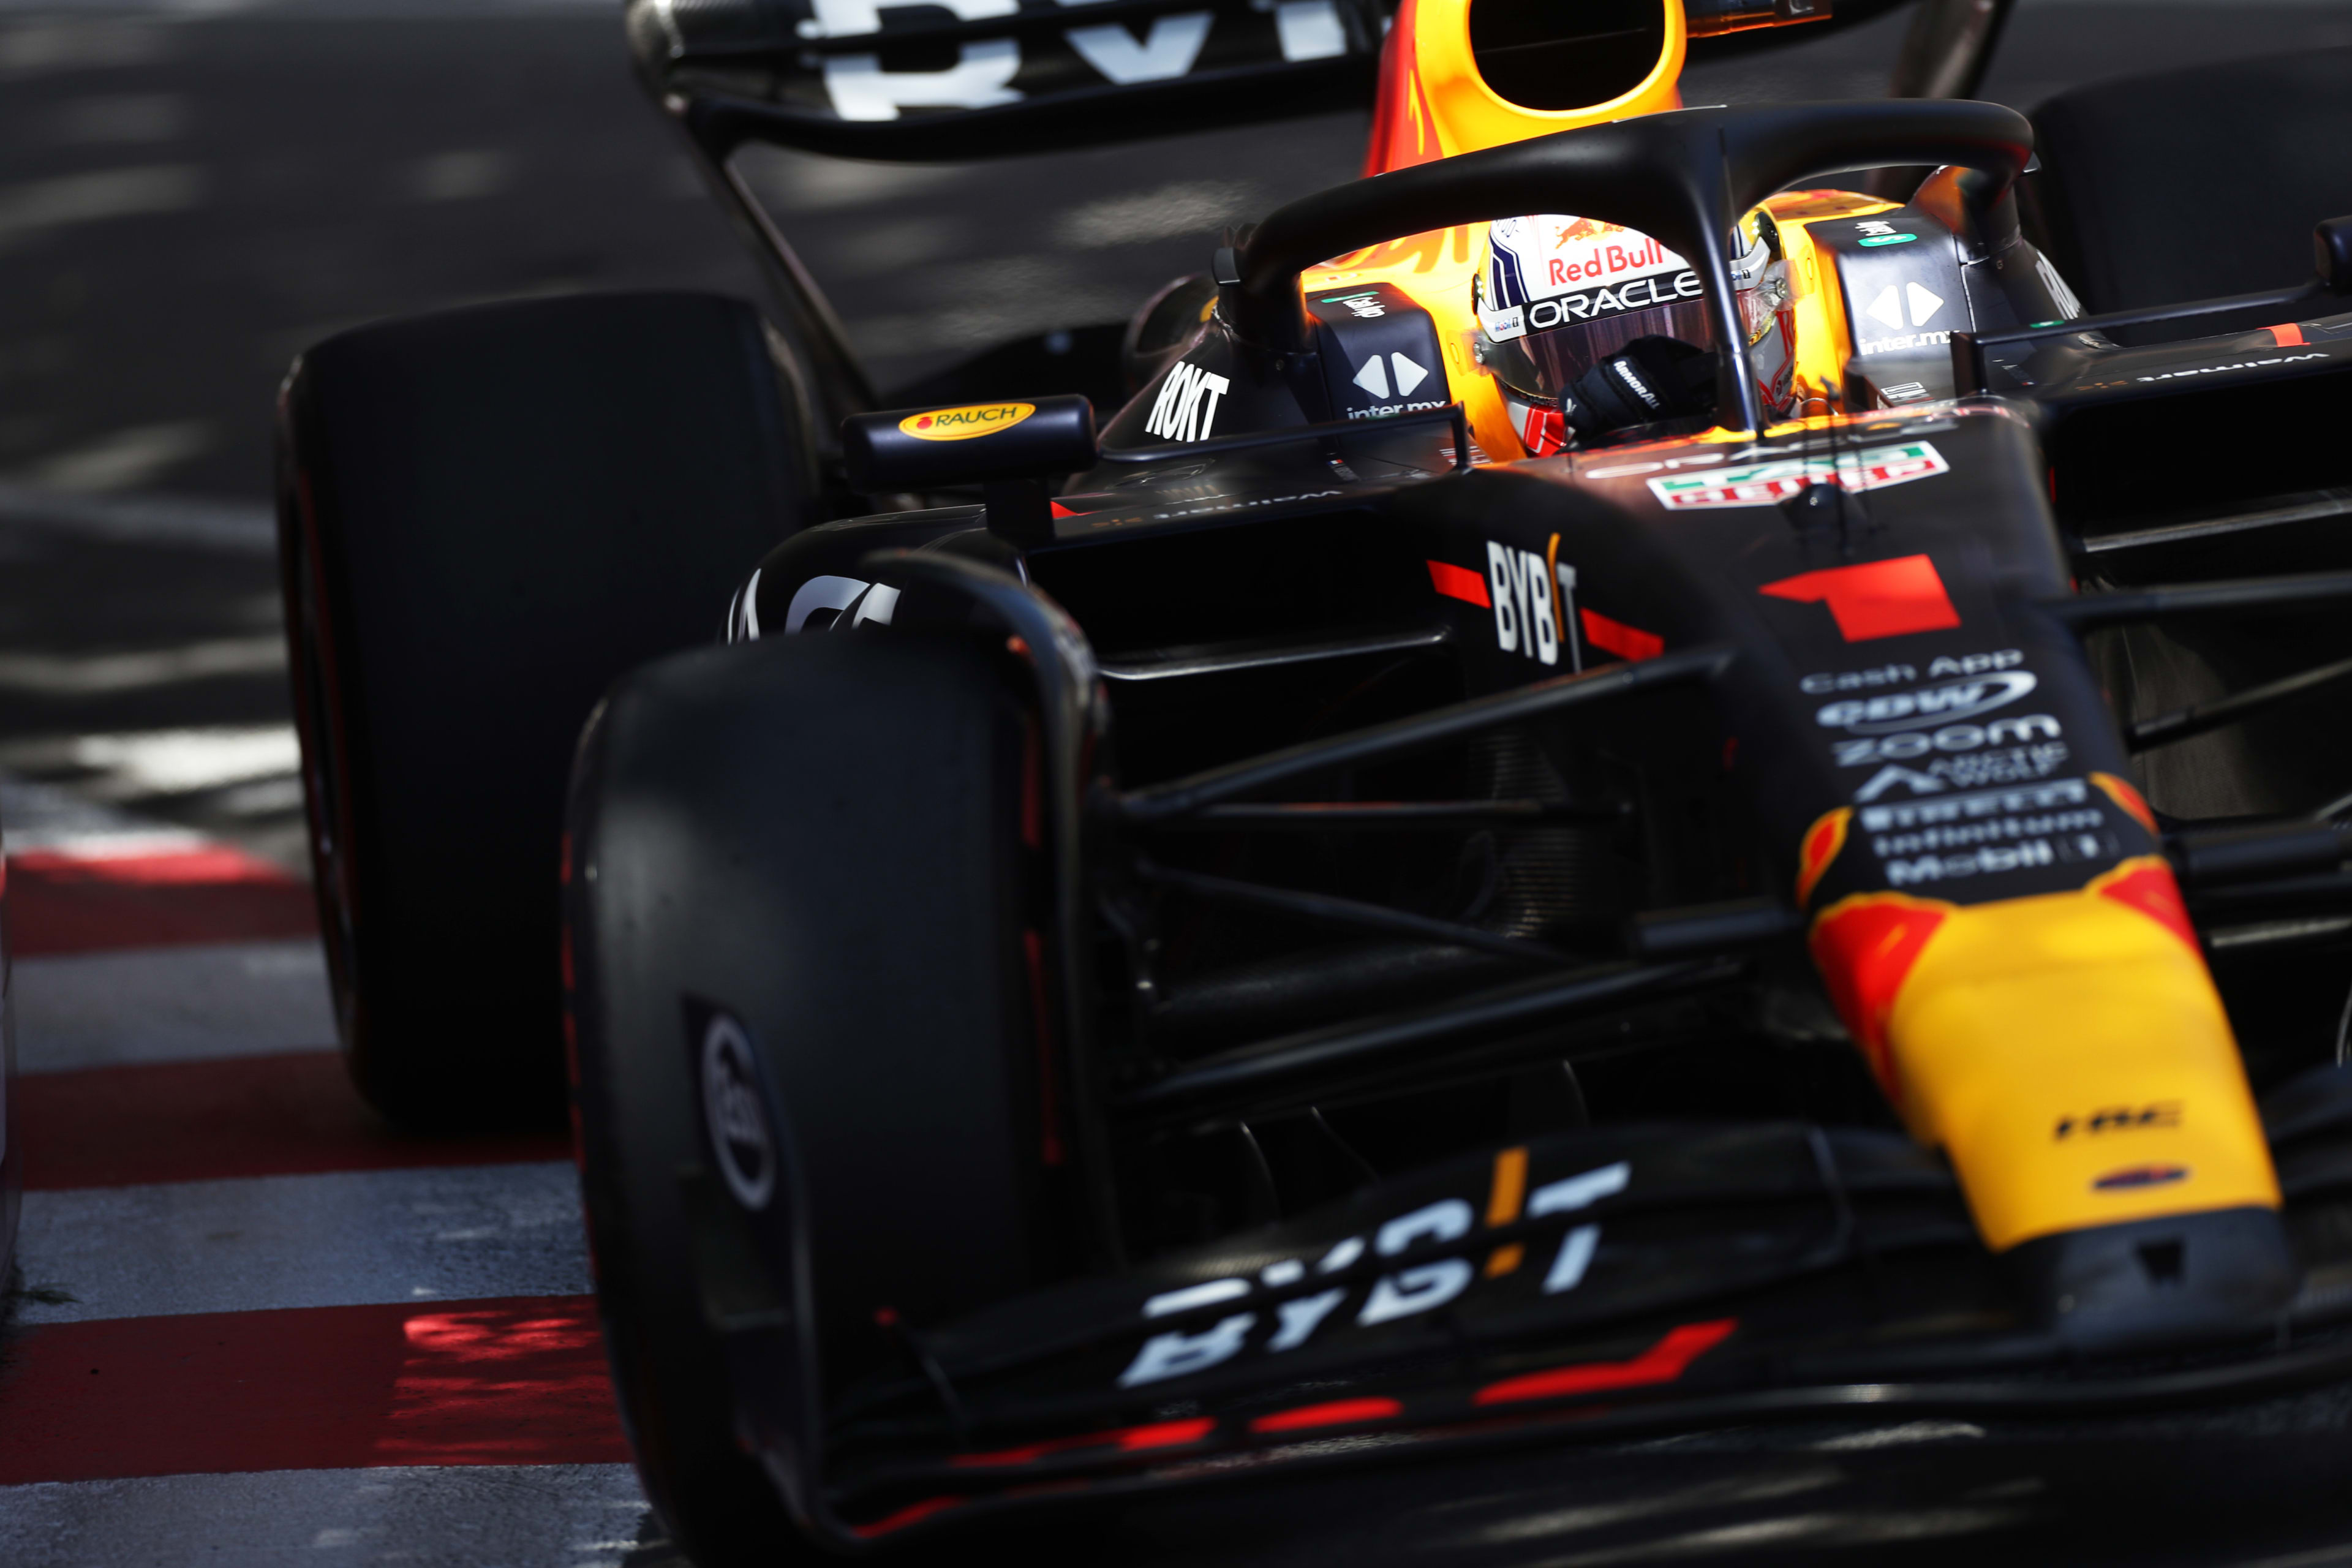 FP3 Verstappen narrowly leads Perez as Hamilton crashes out in final practice session in Monaco Formula 1®